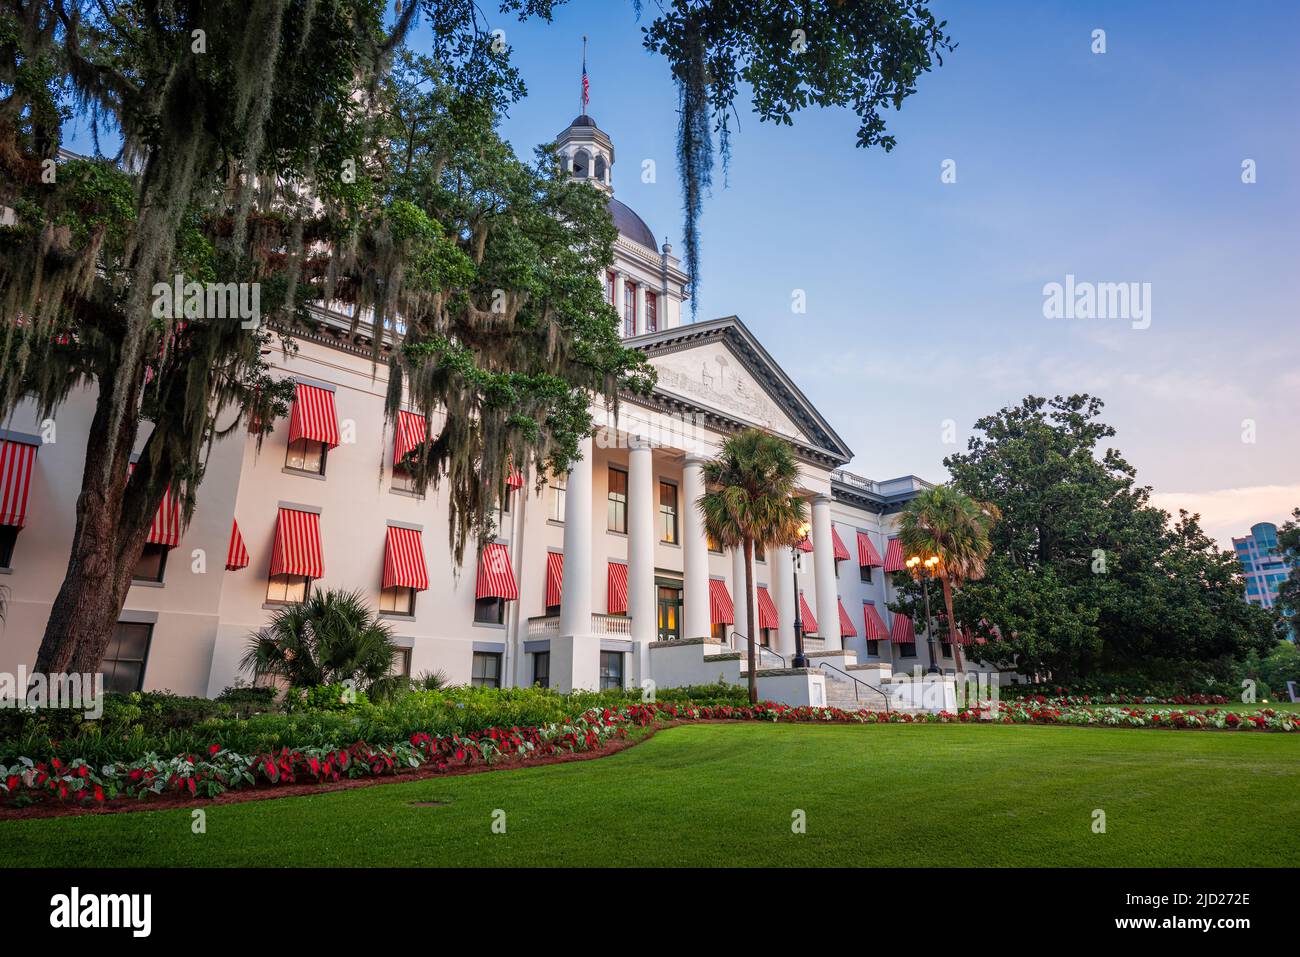 Tallahassee, Florida, USA with the Old and New Capitol Building at twilight. Stock Photo